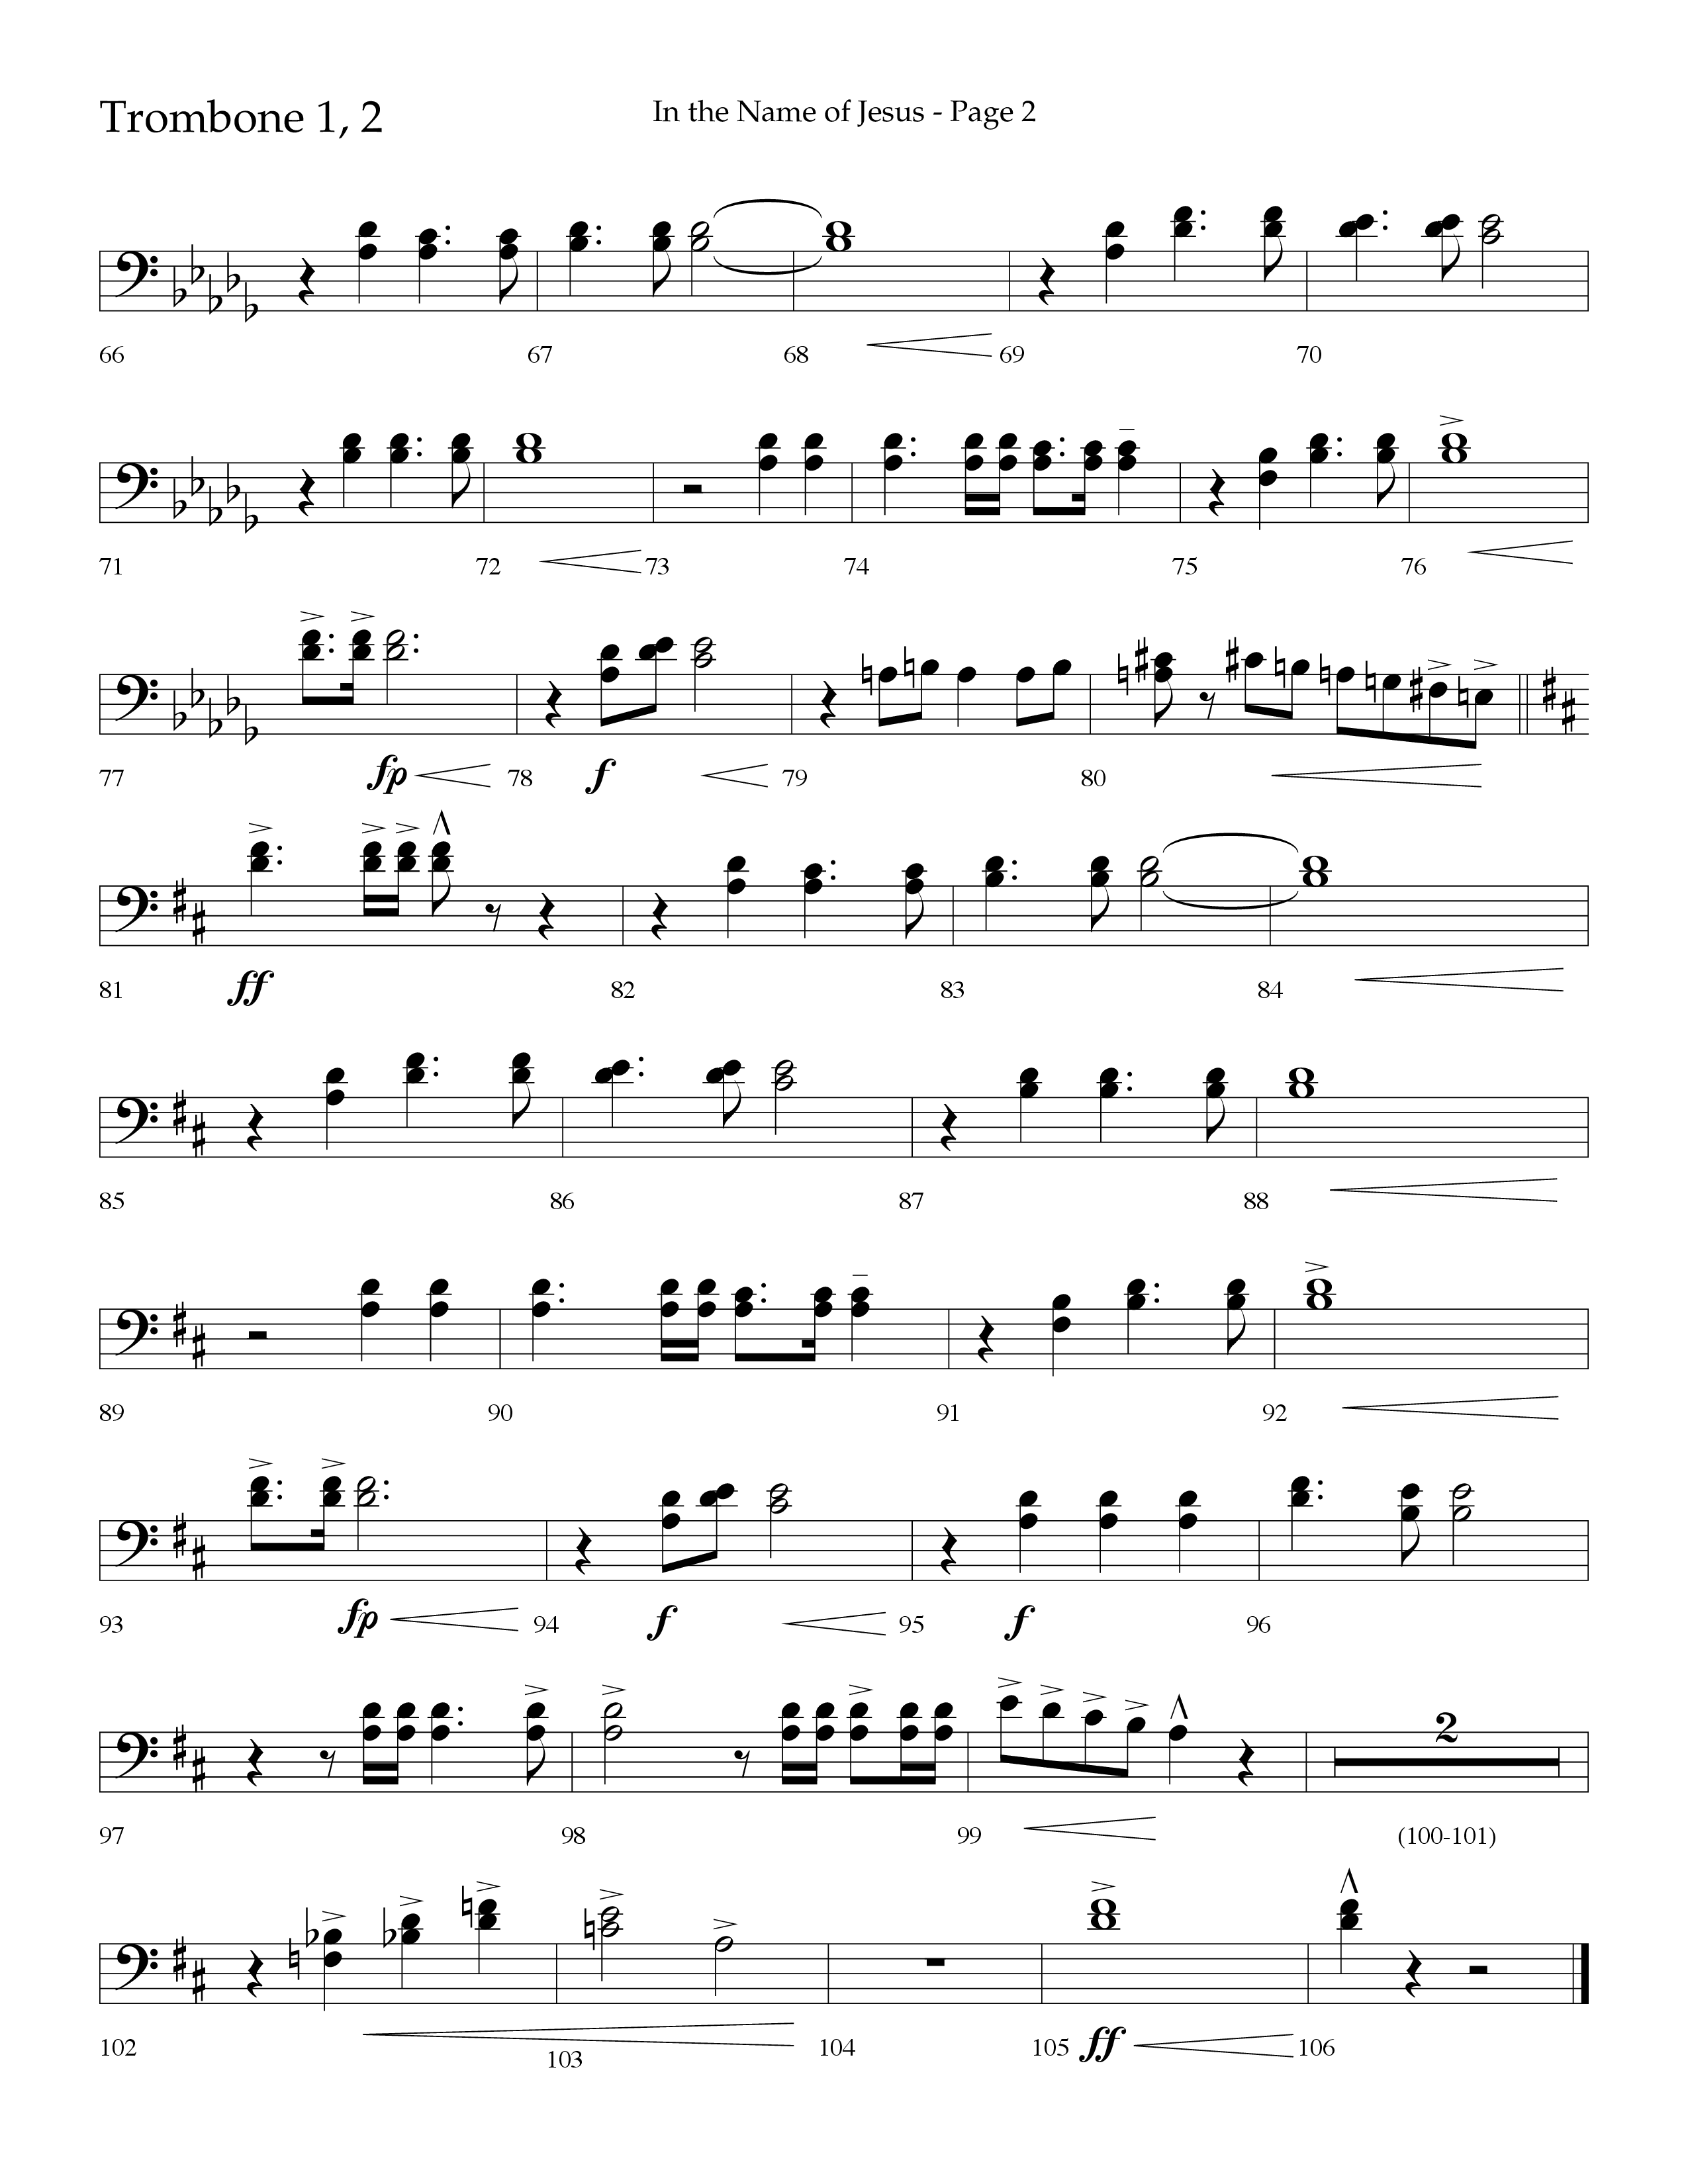 In The Name Of Jesus (Choral Anthem SATB) Trombone 1/2 (Lifeway Choral / Arr. Jay Rouse)